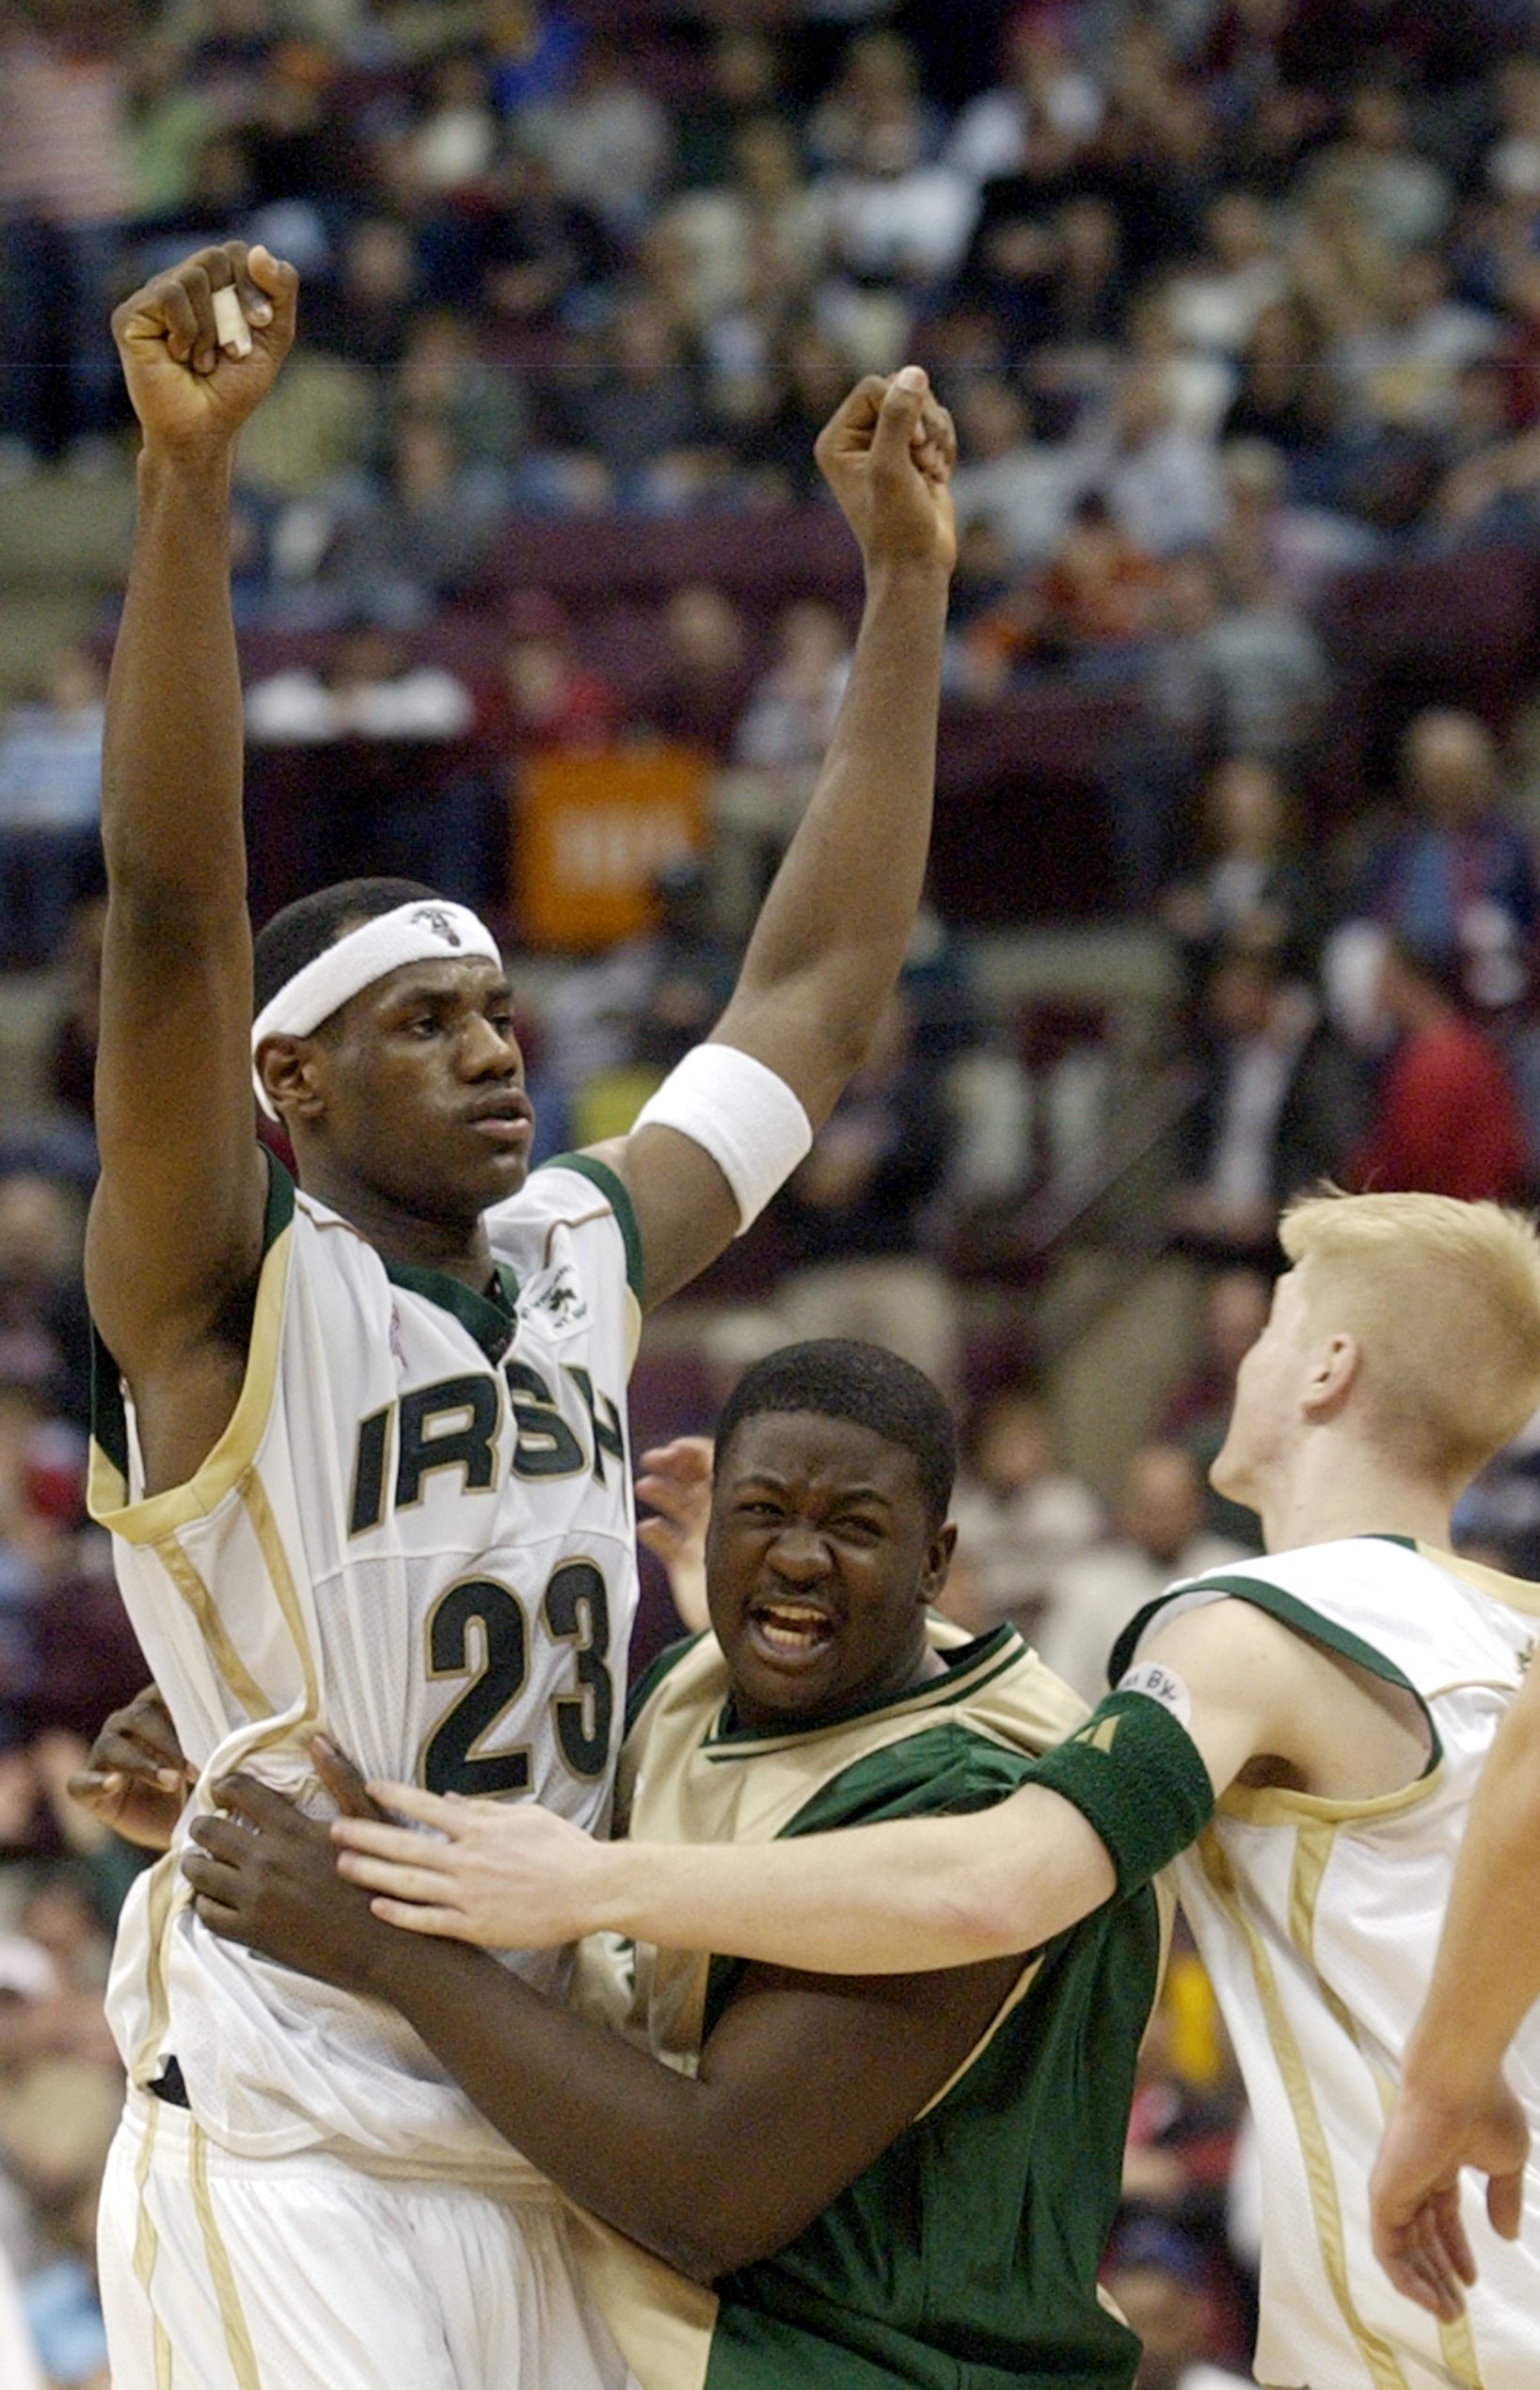 LeBron James returns to St. Vincent-St. Mary to honor his high